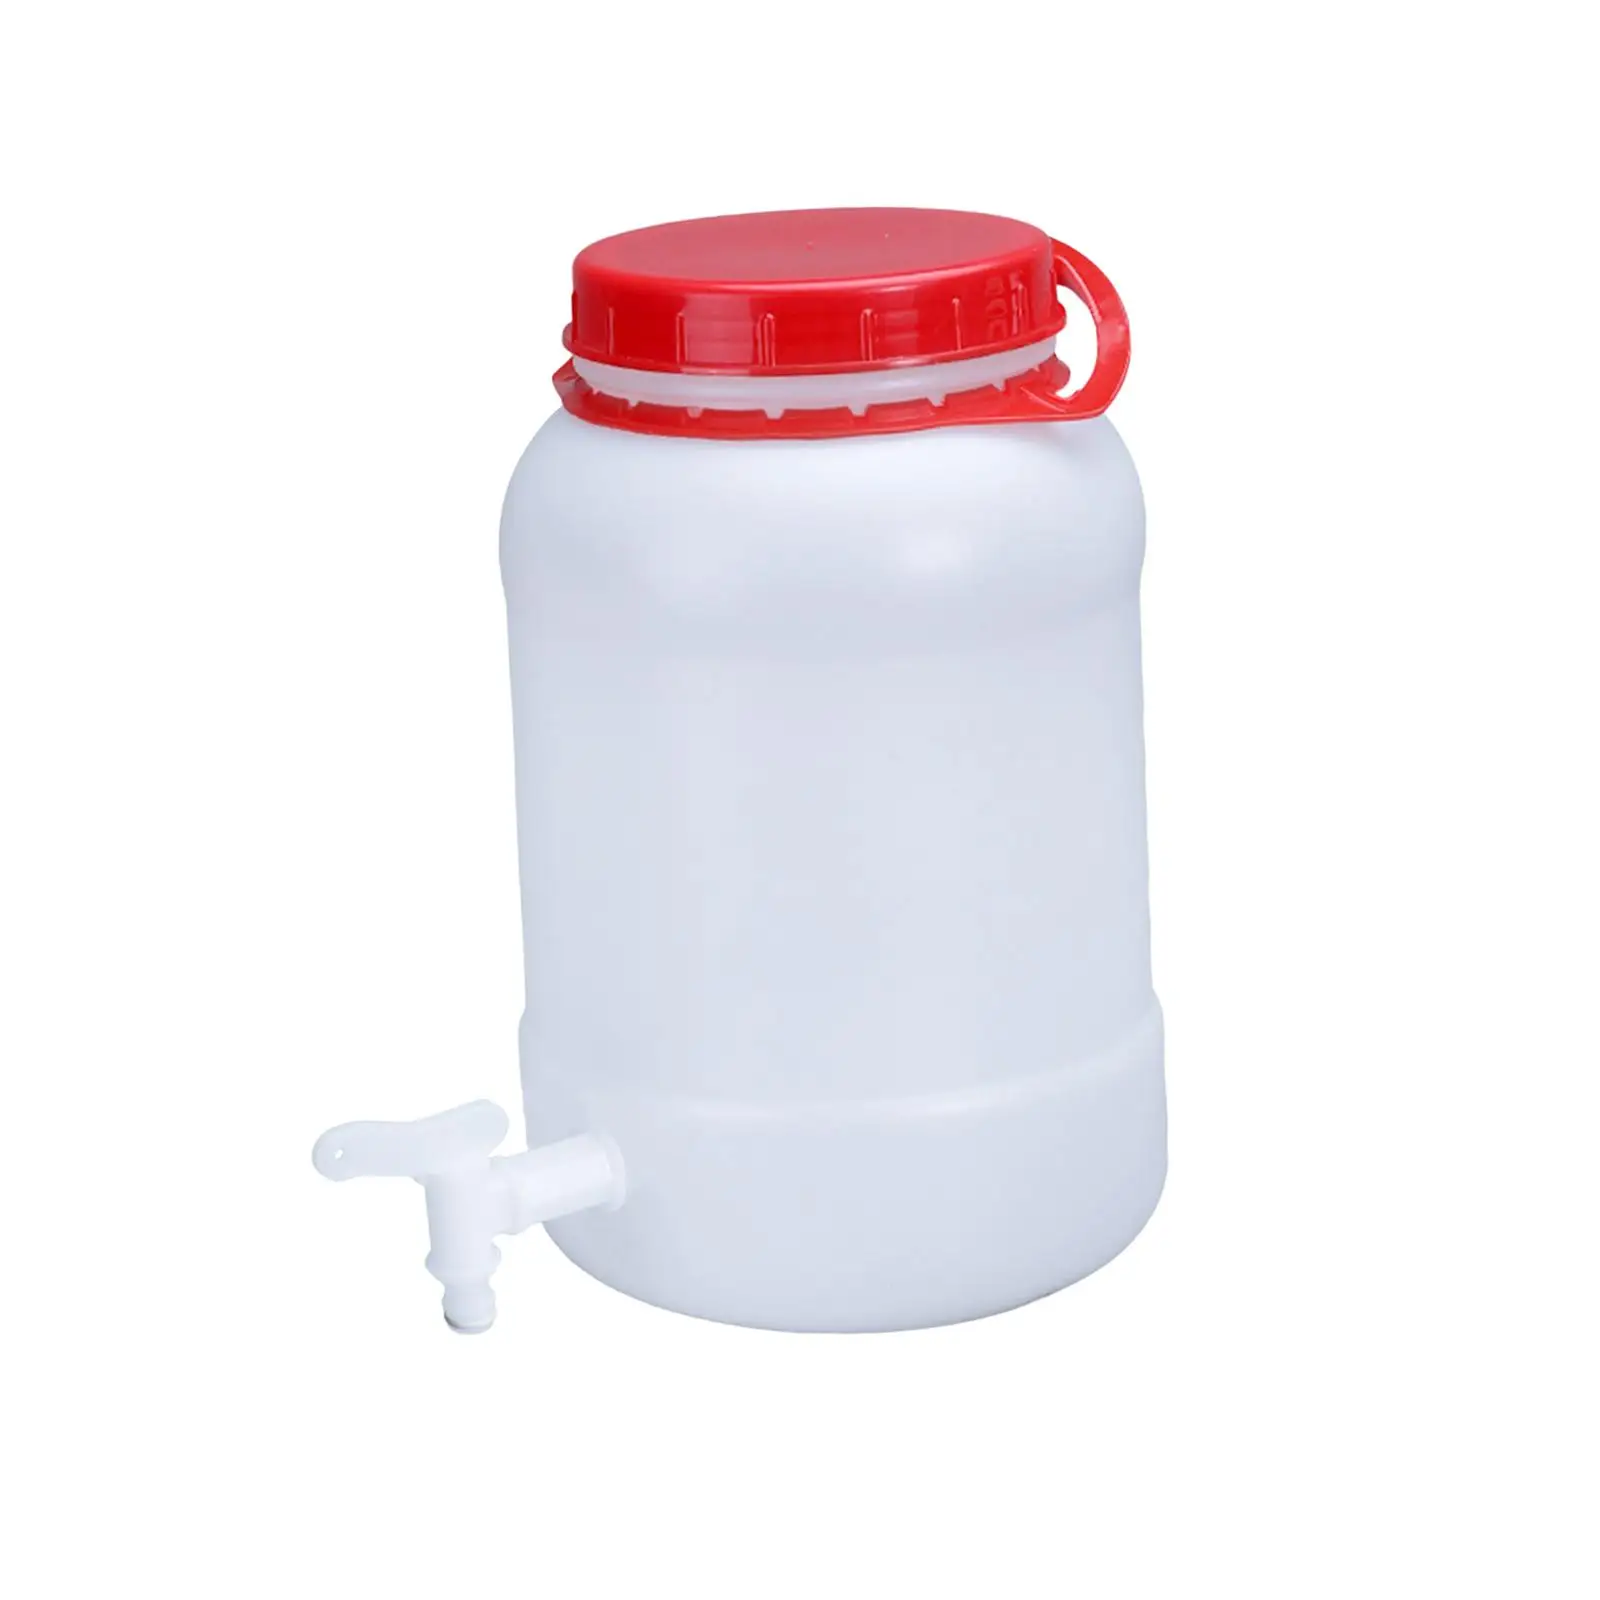 Water Storage Barrel with Spigot Drink Dispenser Canister 10L Water Carrier Water Container for Backpacking BBQ Survival Hiking